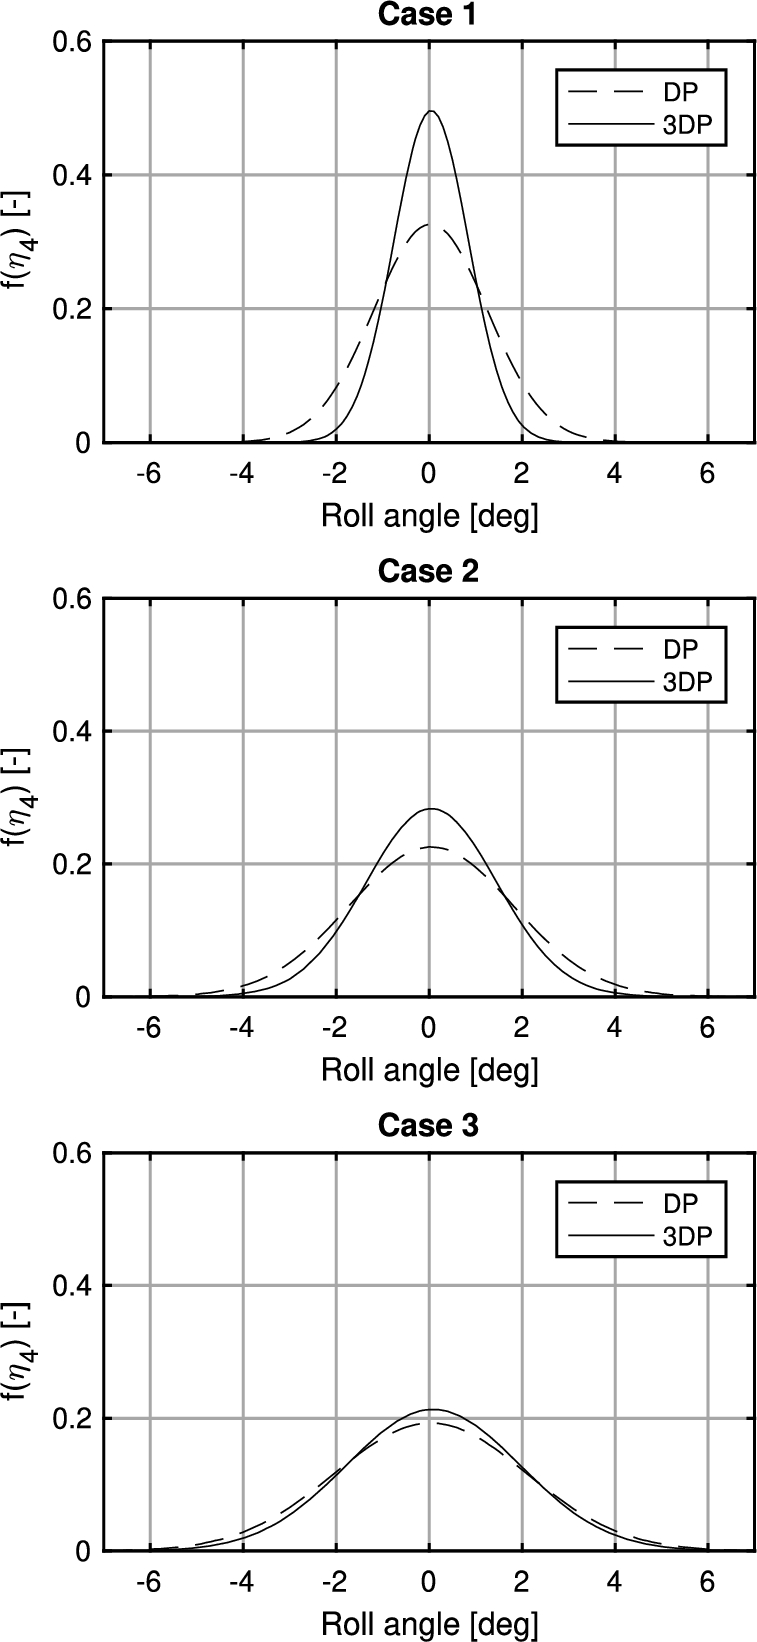 Normal distribution of roll for simulation case 1, 2 and 3 (from top to bottom).